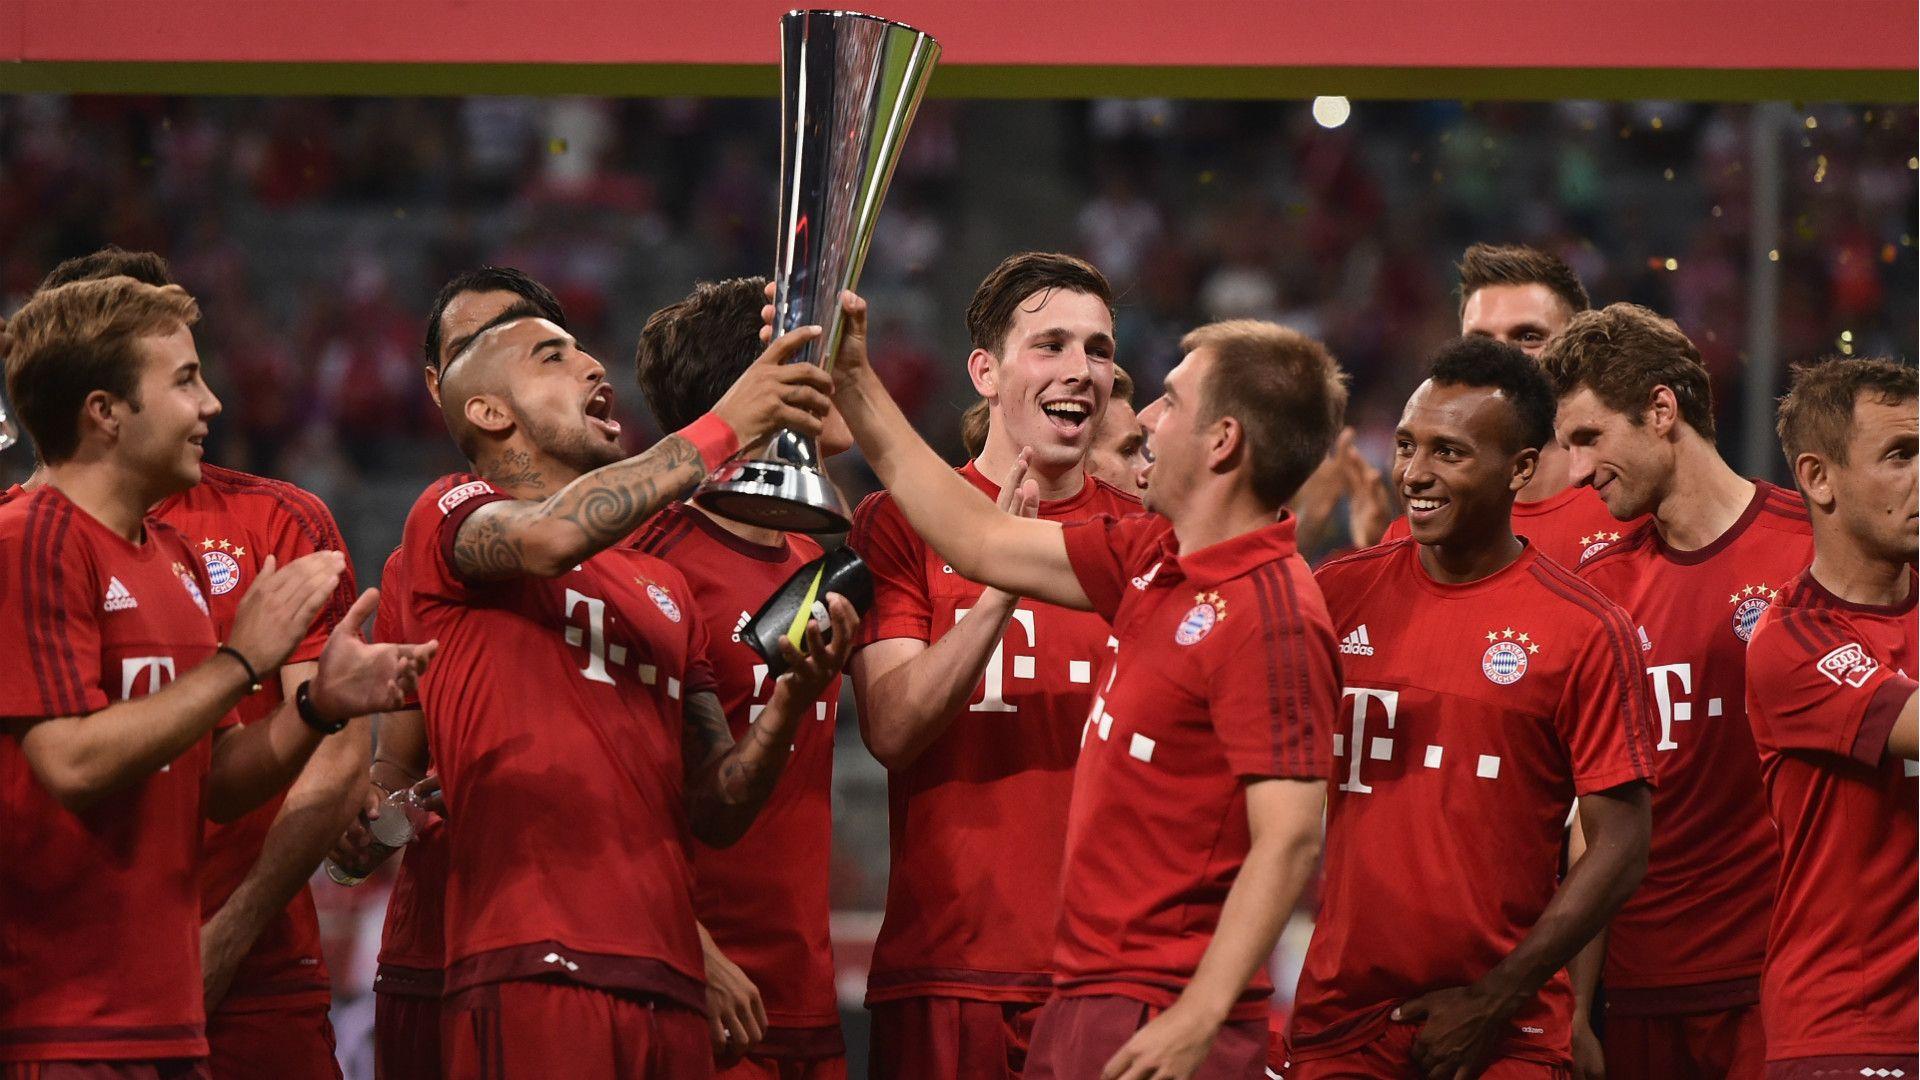 Bayern Munich Players With Trophy Wallpaper: Players, Teams